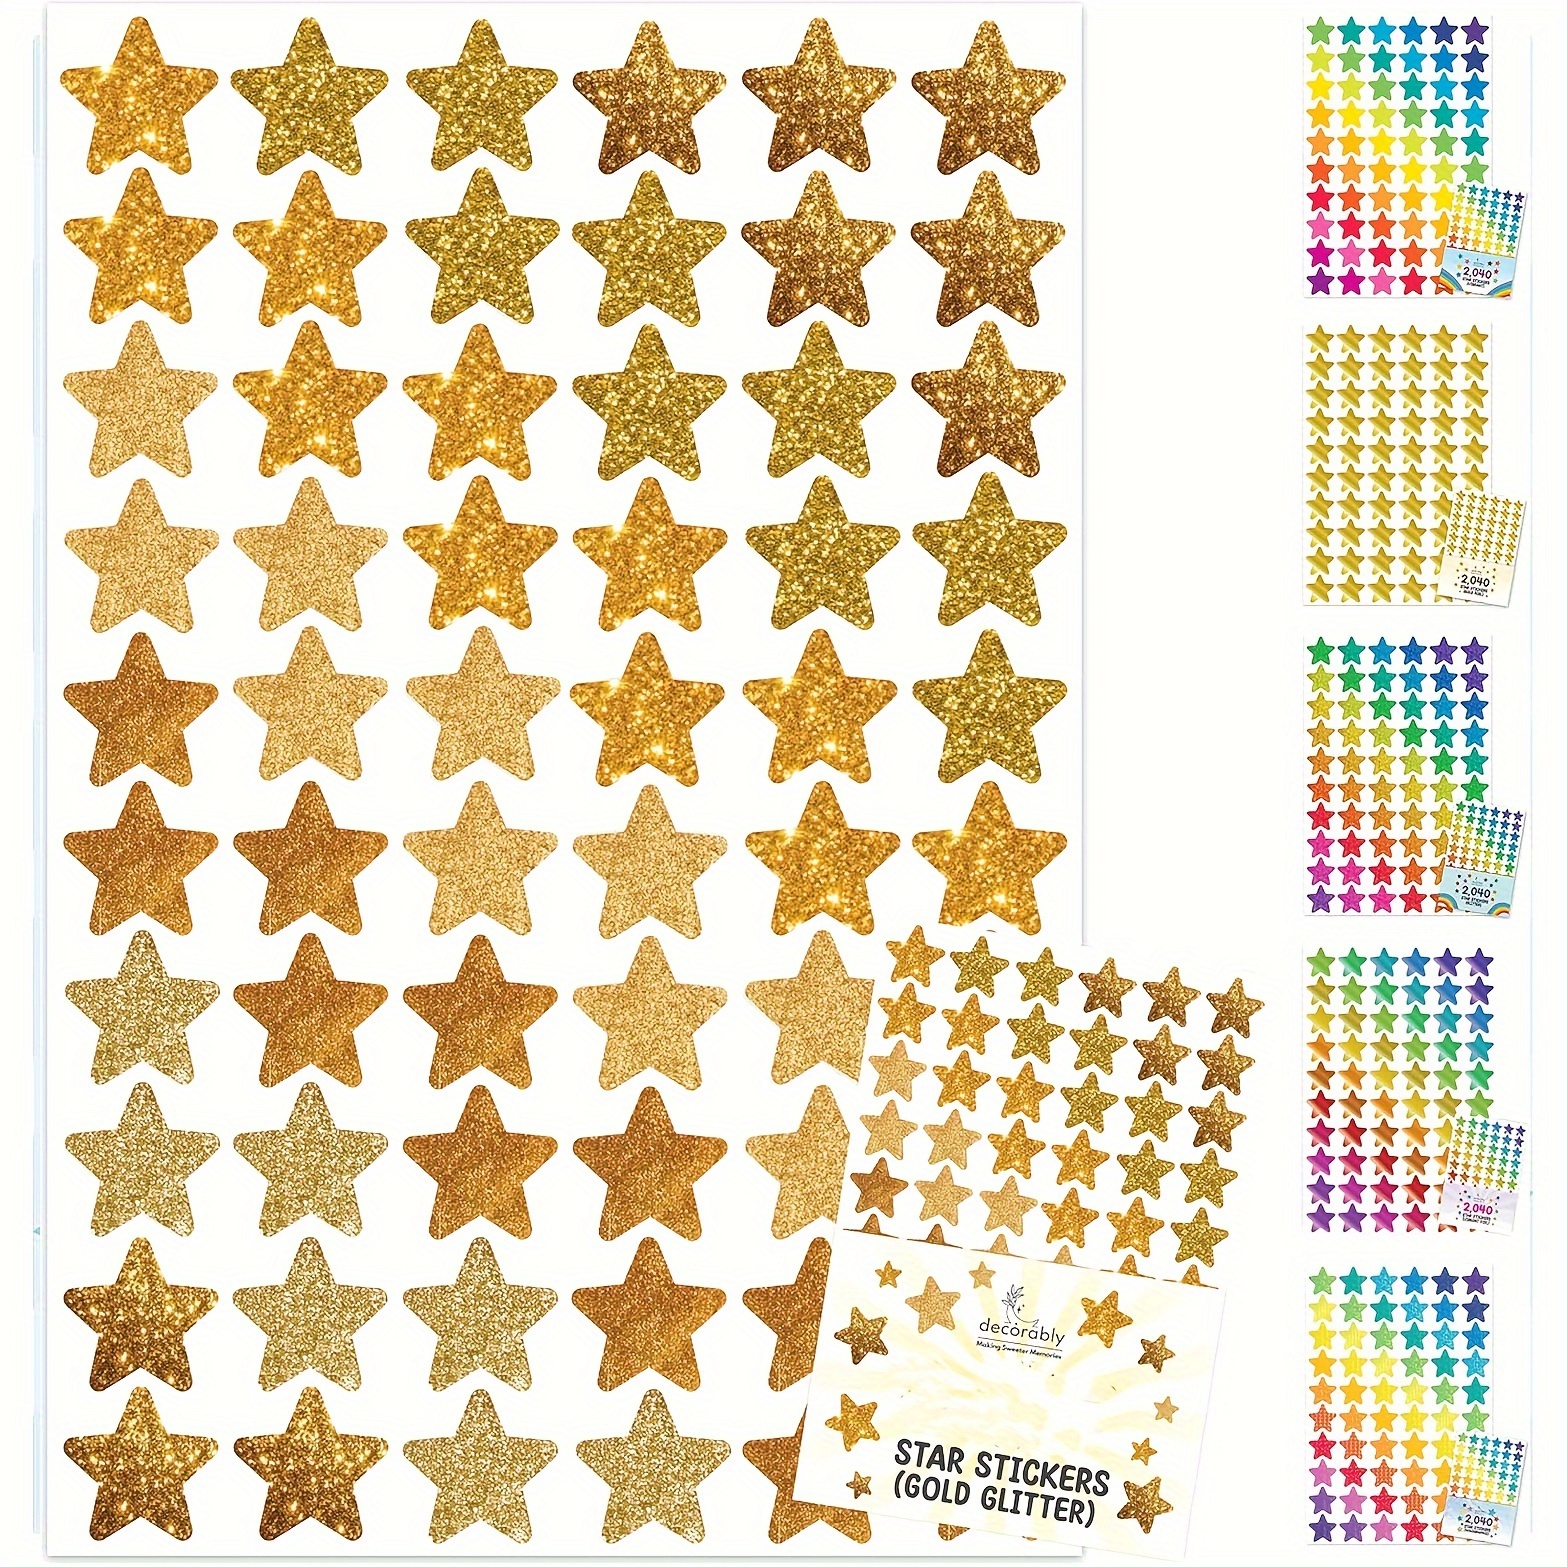 5 Sheets Improved Golden Star Stickers For Kids Reward Stickers, 6 Designs  Shiny Star Stickers Small Sticker, Gold Sticker Stars , Small Star Stickers